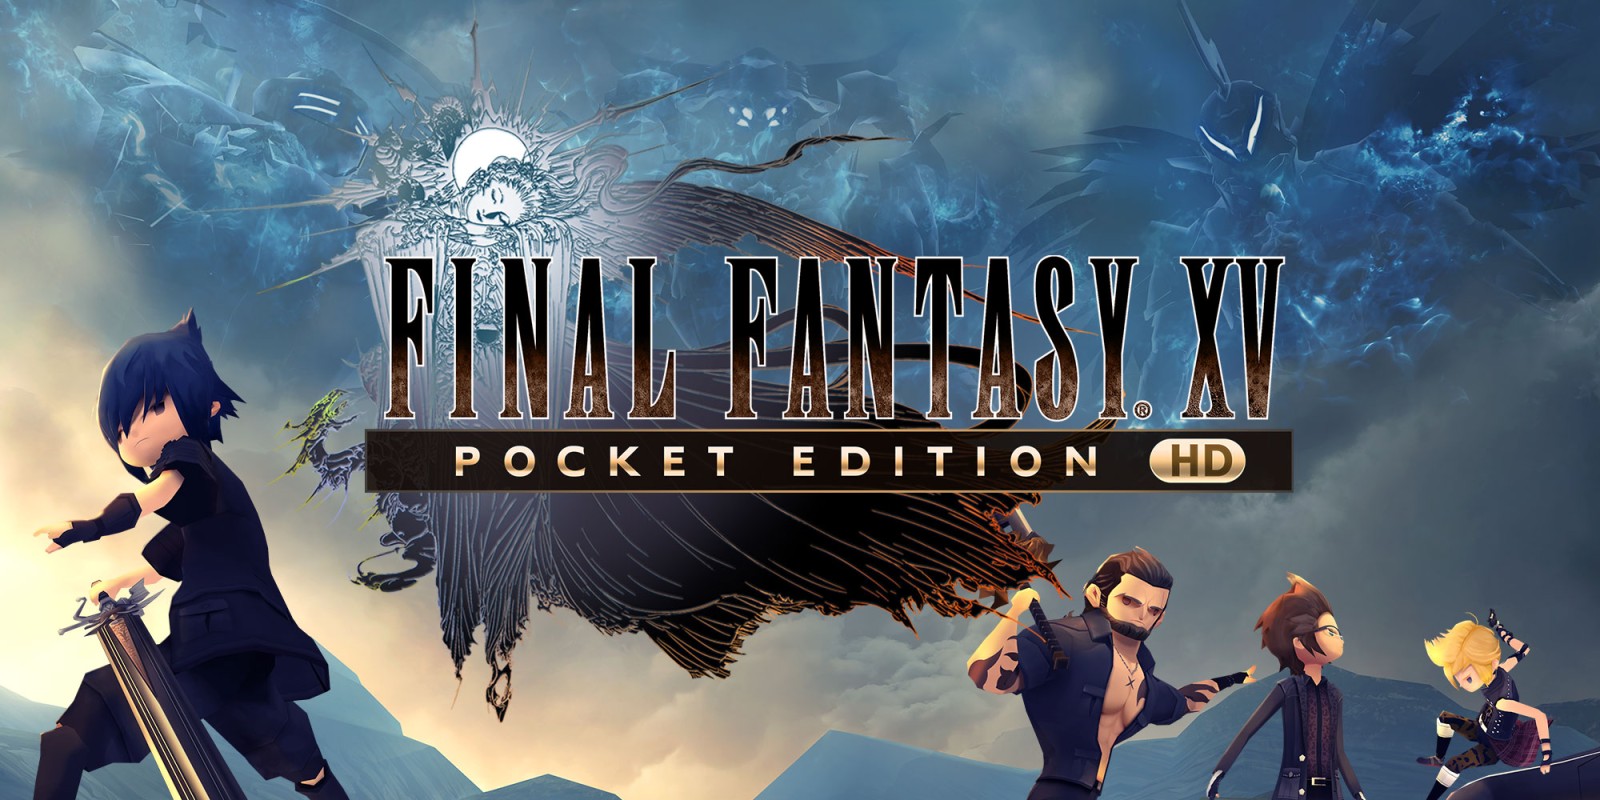 Final fantasy xv pocket edition just appeared on the xbox one.